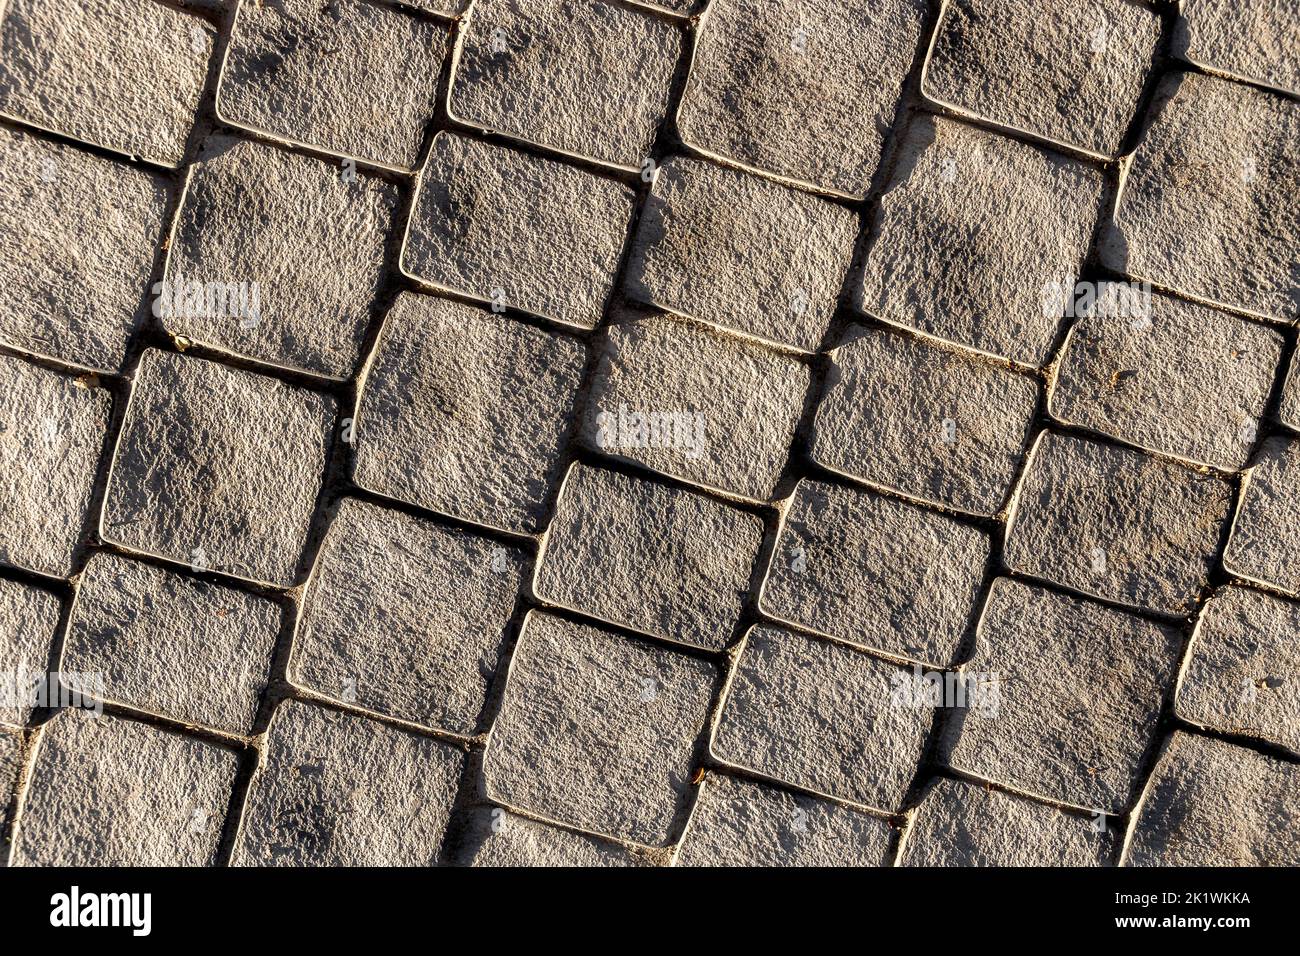 masonry walls or roads lined with small stones Stock Photo